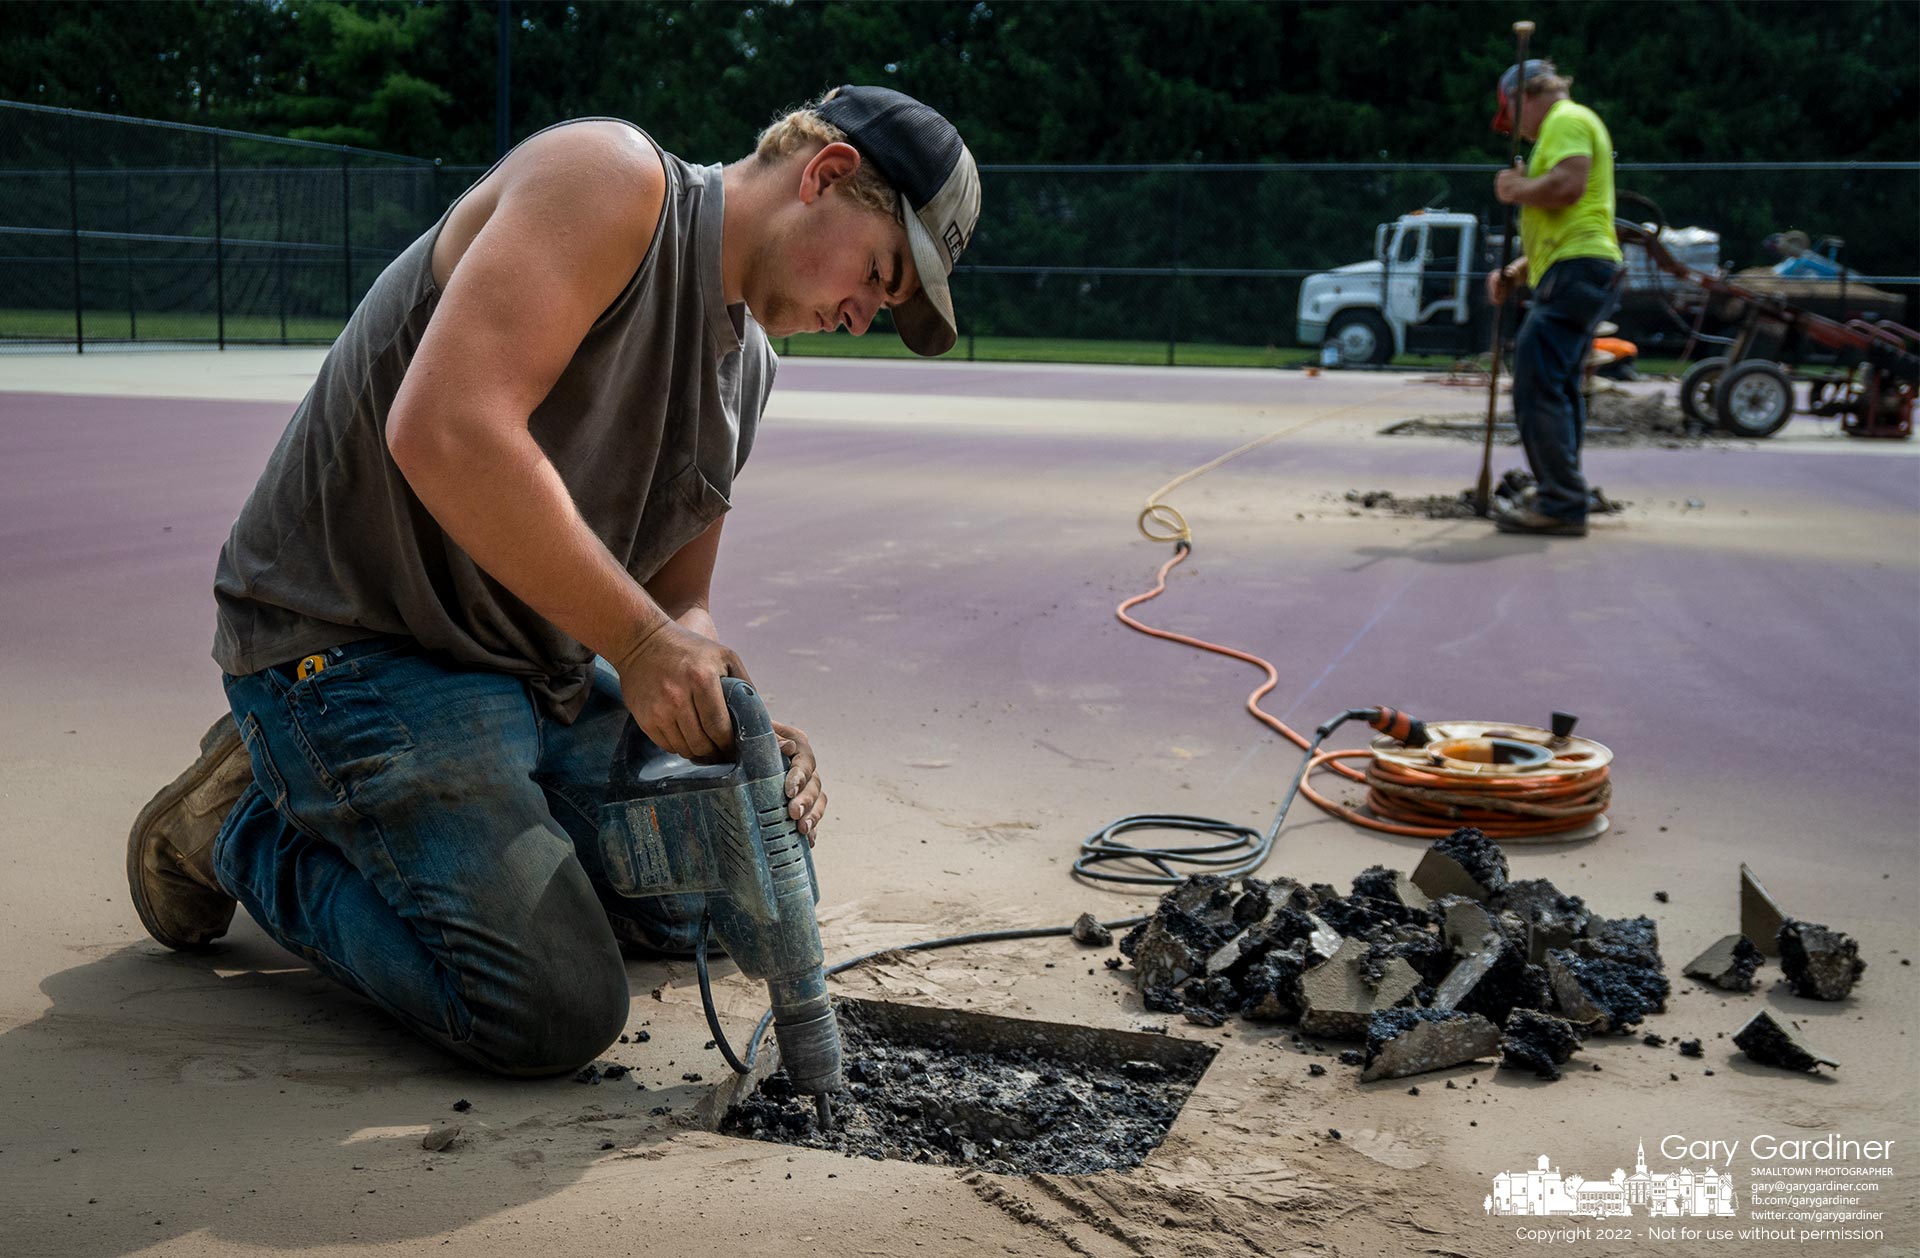 A worker removes asphalt and gravel for the new location for posts at the recently resurfaced tennis courts on South Otterbein after discovering the original holes were out of alignment with the court. My Final Photo for July 20, 2022.